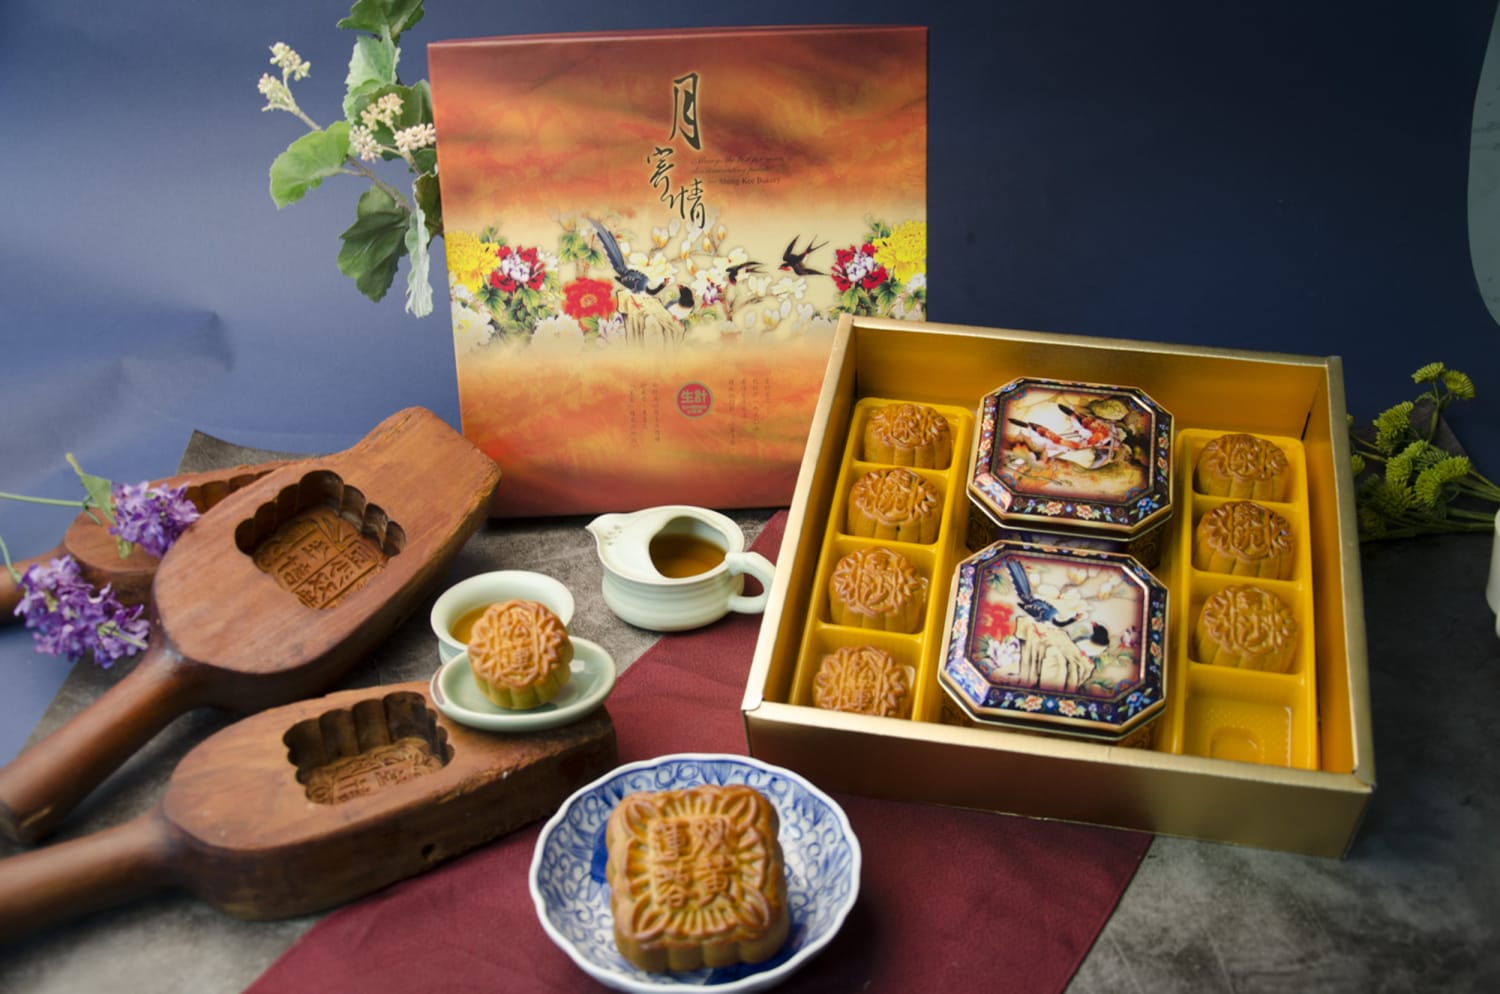 Mooncakes and why we should think out of the box